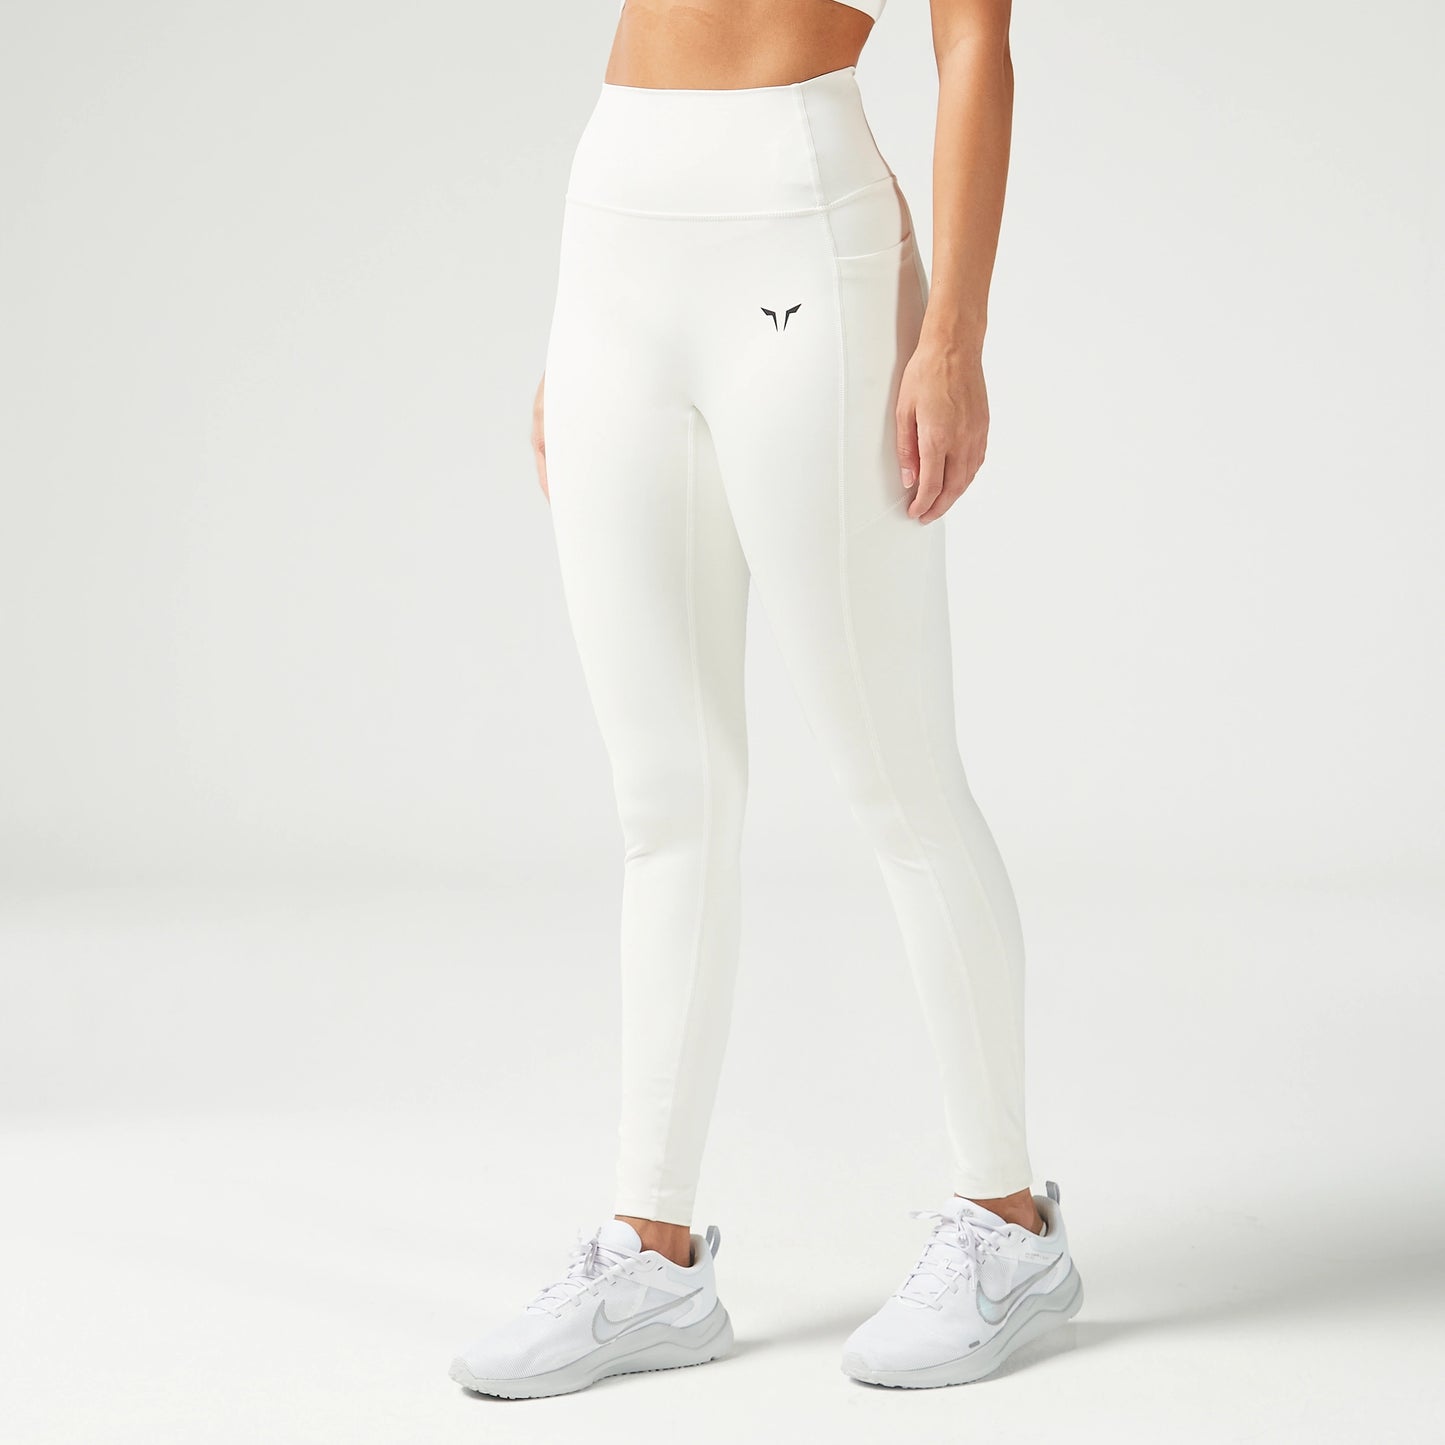 Essential ACT Double Layered Leggings 27" 2.0 - Pearl White